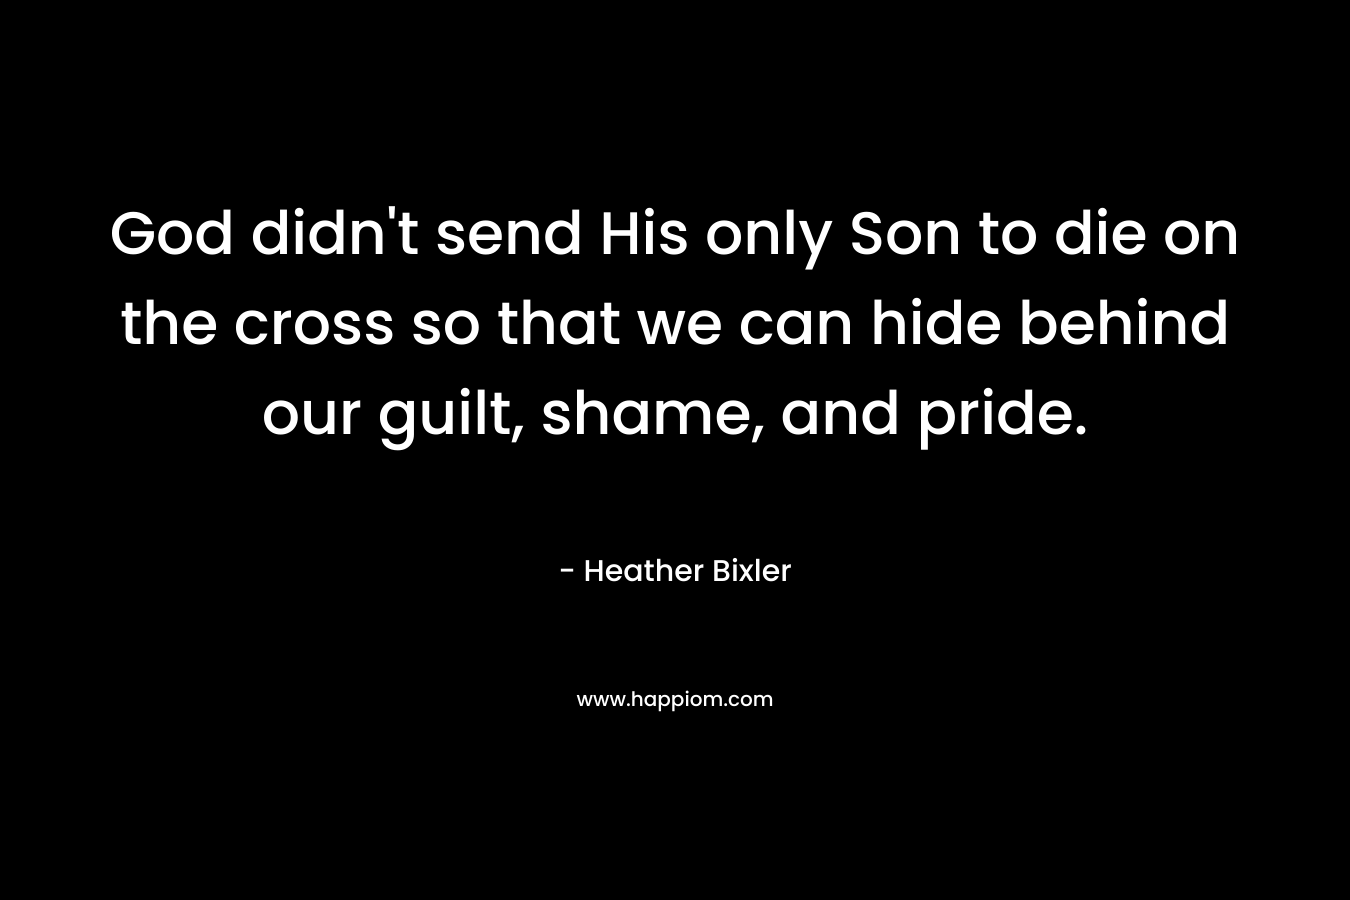 God didn’t send His only Son to die on the cross so that we can hide behind our guilt, shame, and pride. – Heather Bixler